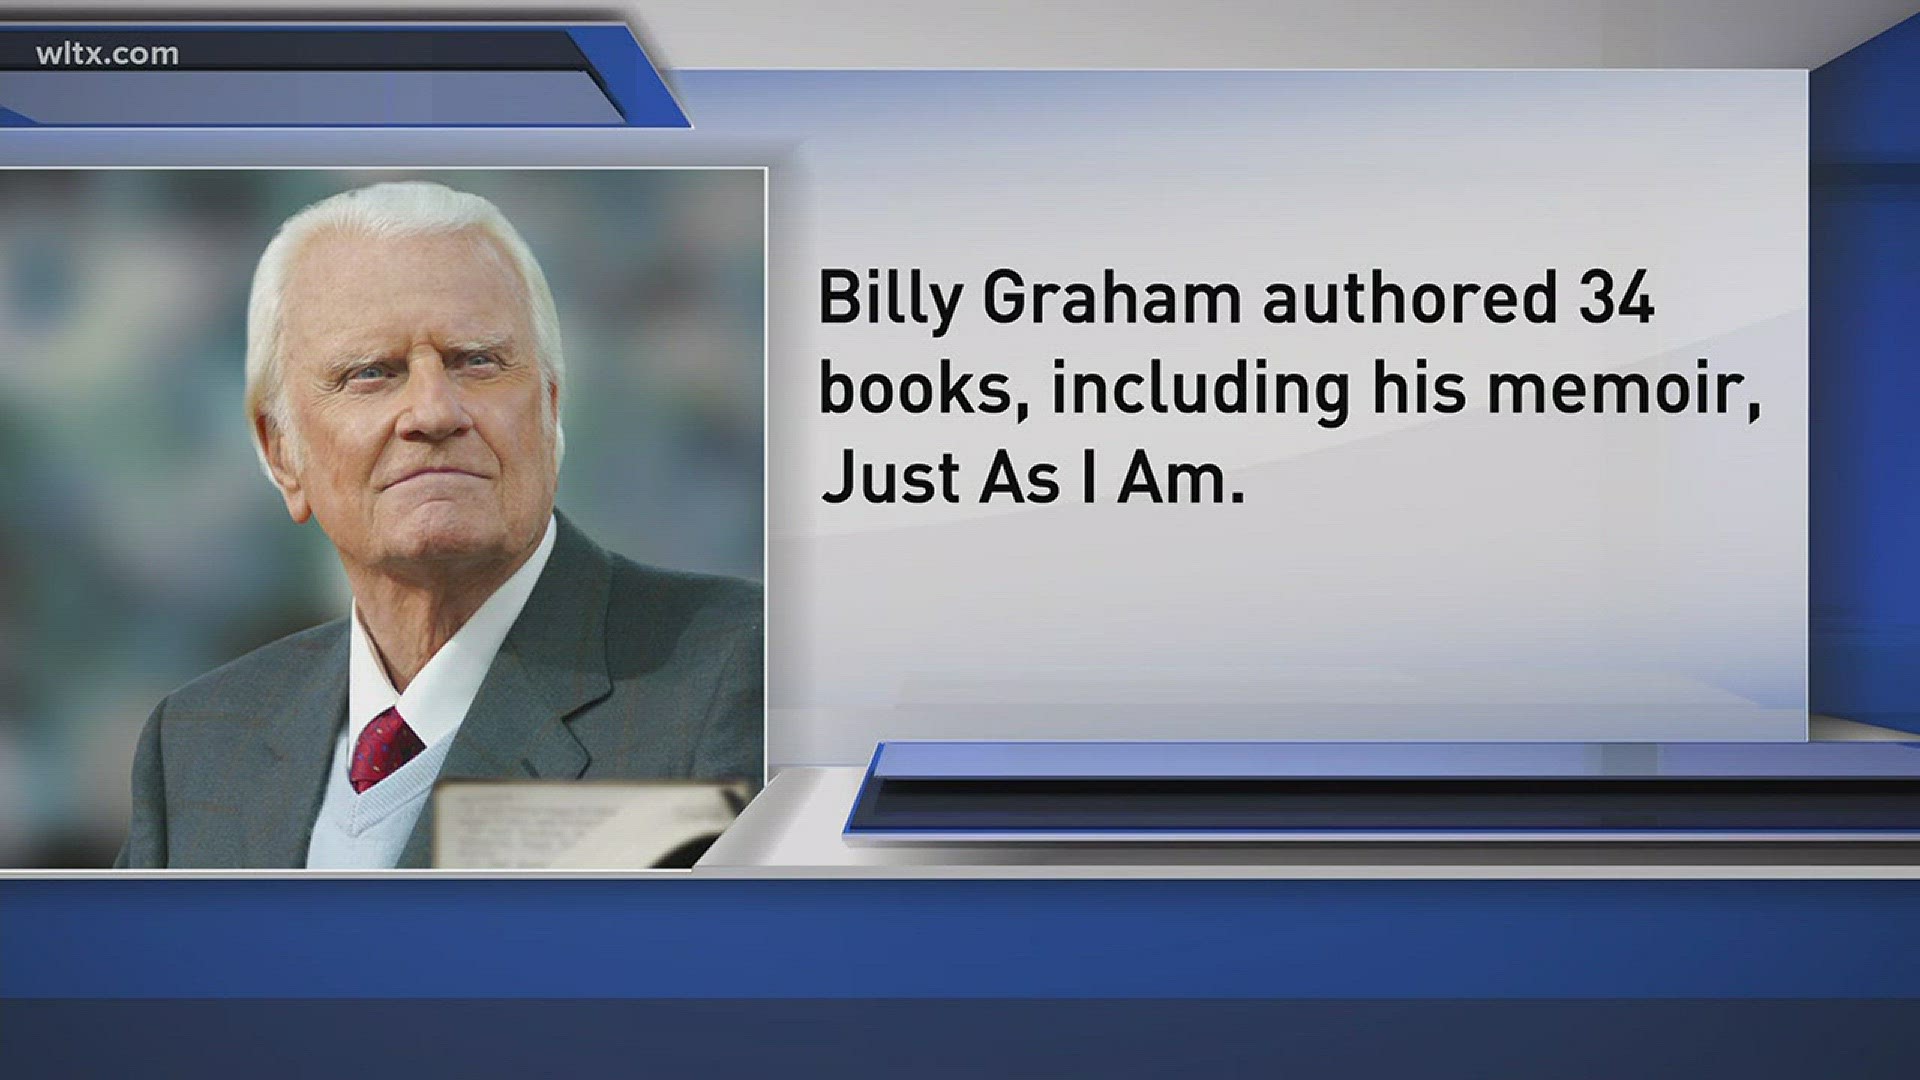 Some facts about the Rev. Billy Graham